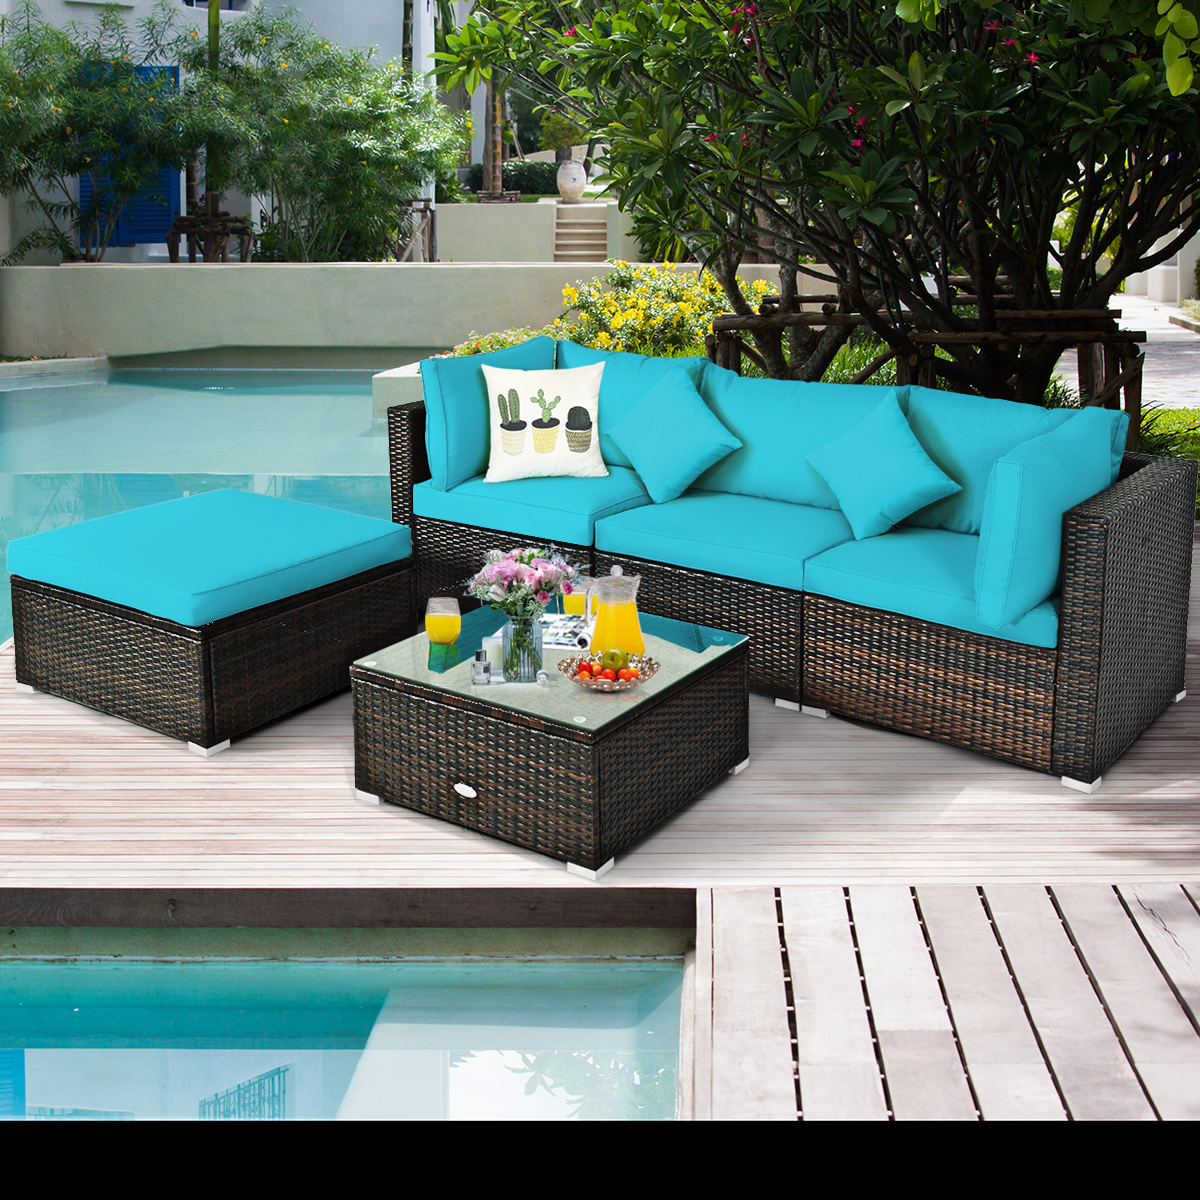 Patiojoy 8-Piece Outdoor Rattan Sectional Loveseat Couch Conversation Sofa Set with Storage Box &Coffee Table Turquoise - image 4 of 6